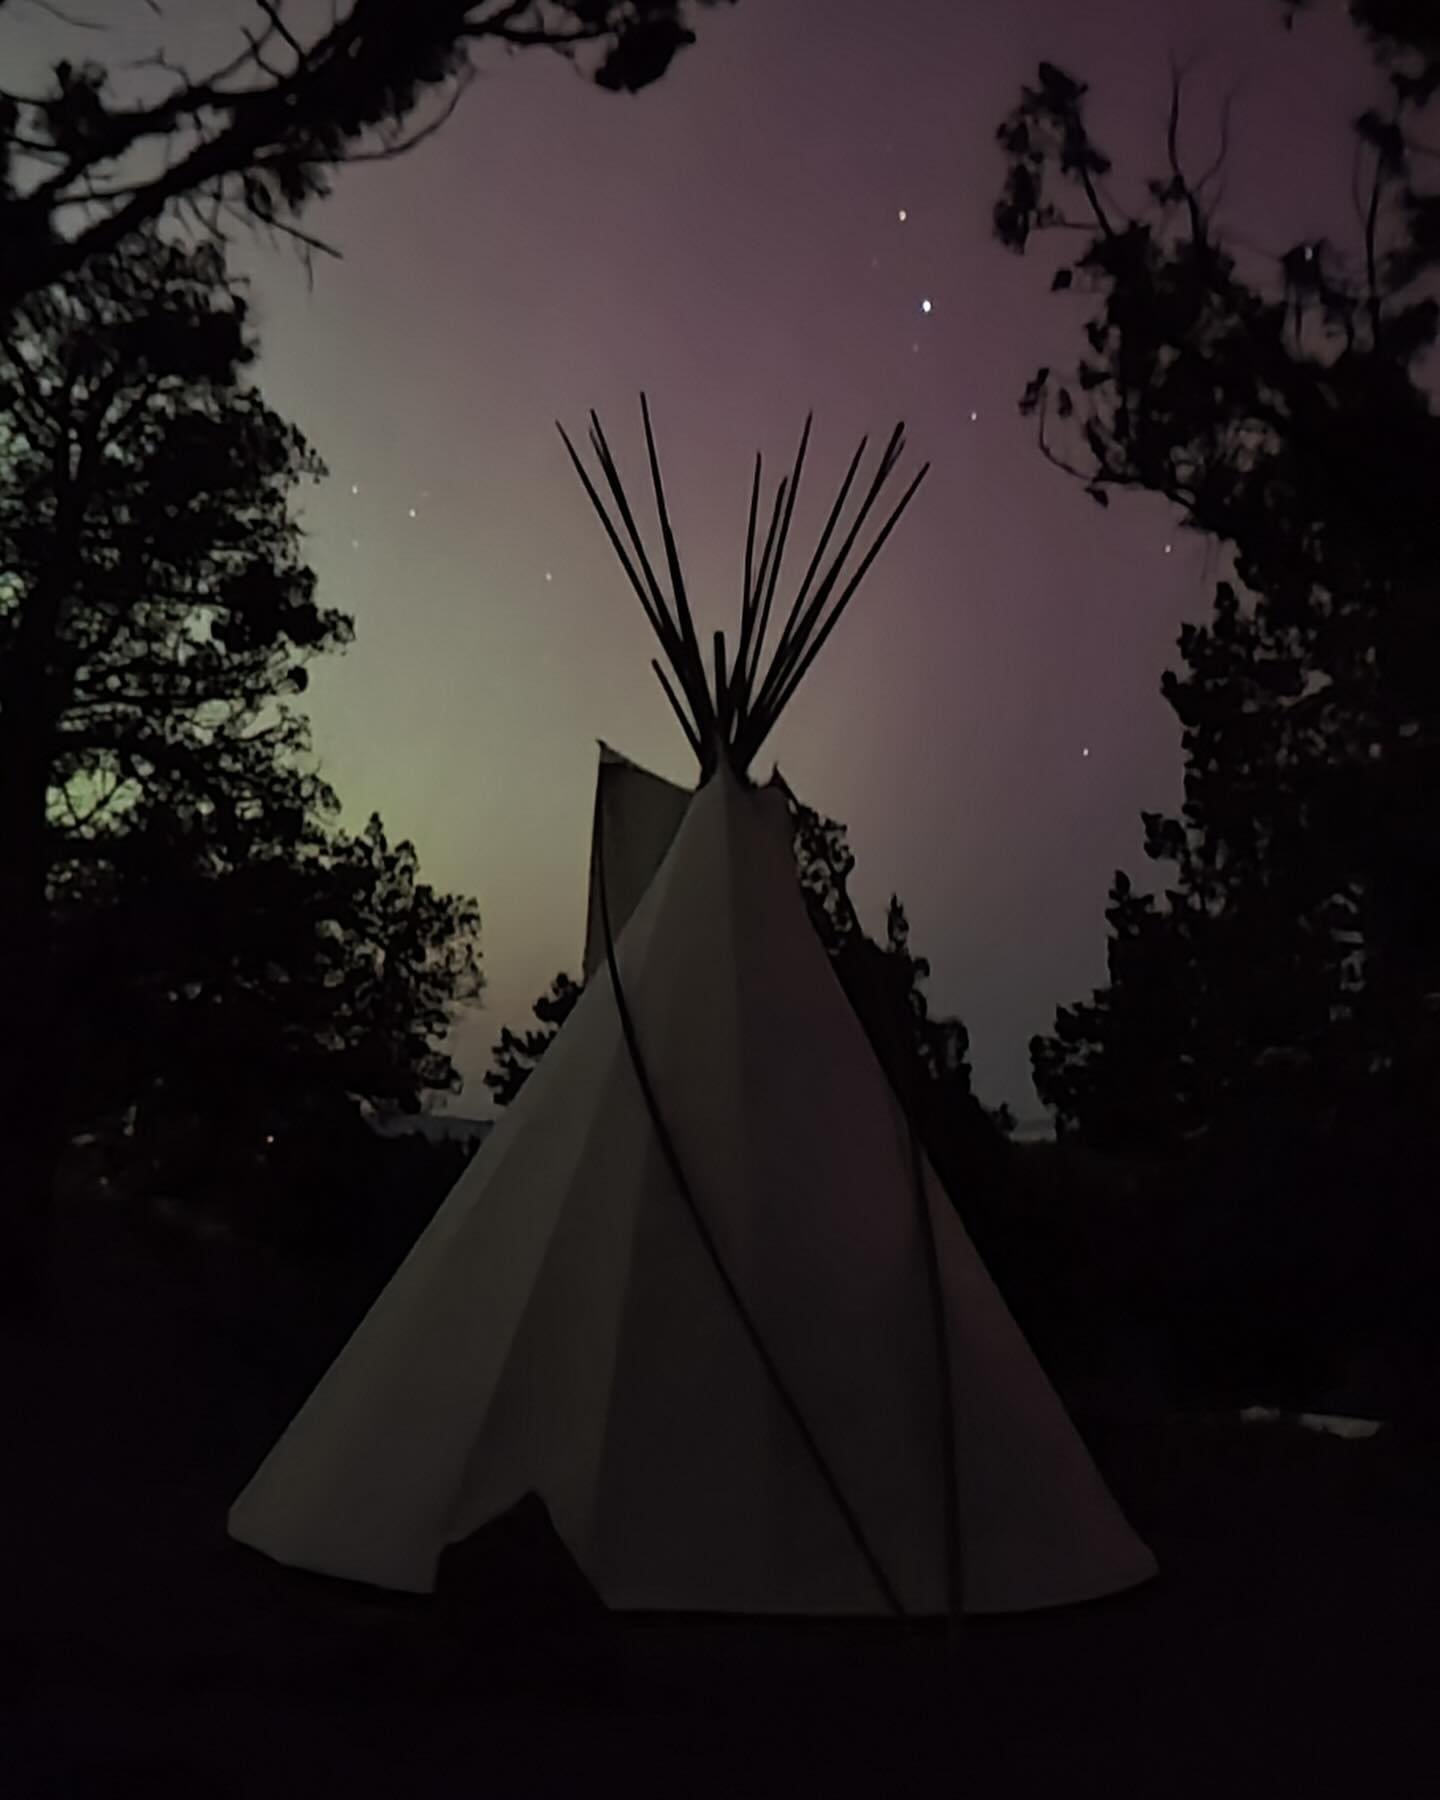 Thanks to @metoliusfly for catching these monumental images last night. I was raised in Alaska with these relatives and story tellers. They followed me around the mountains at night, each color had a meaning. Each way they moved had a meaning. The re